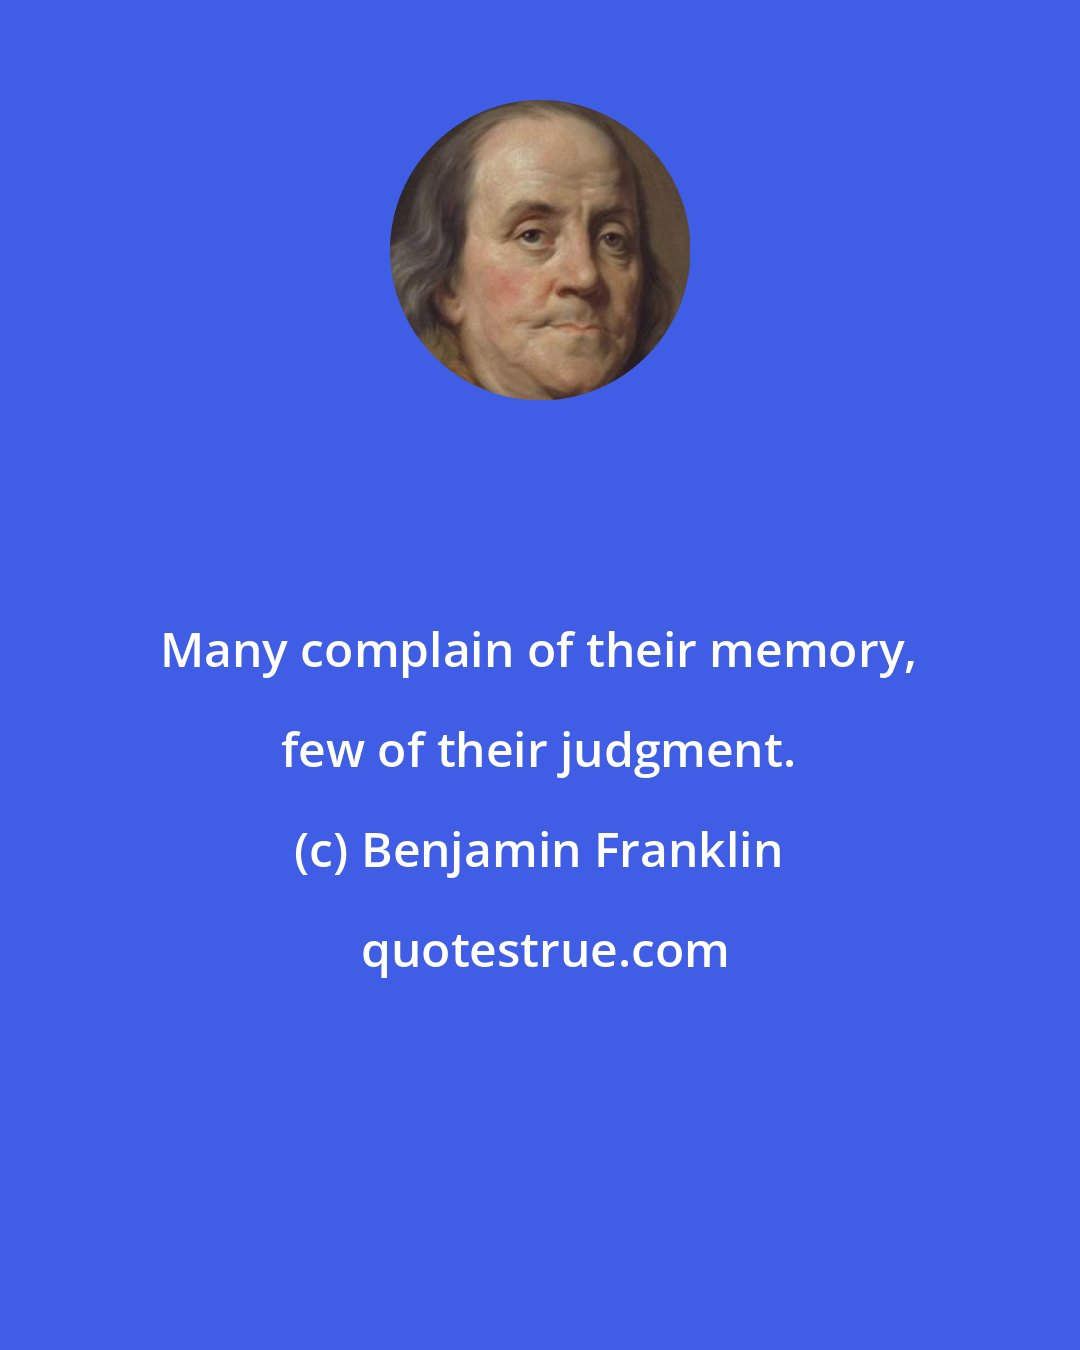 Benjamin Franklin: Many complain of their memory, few of their judgment.